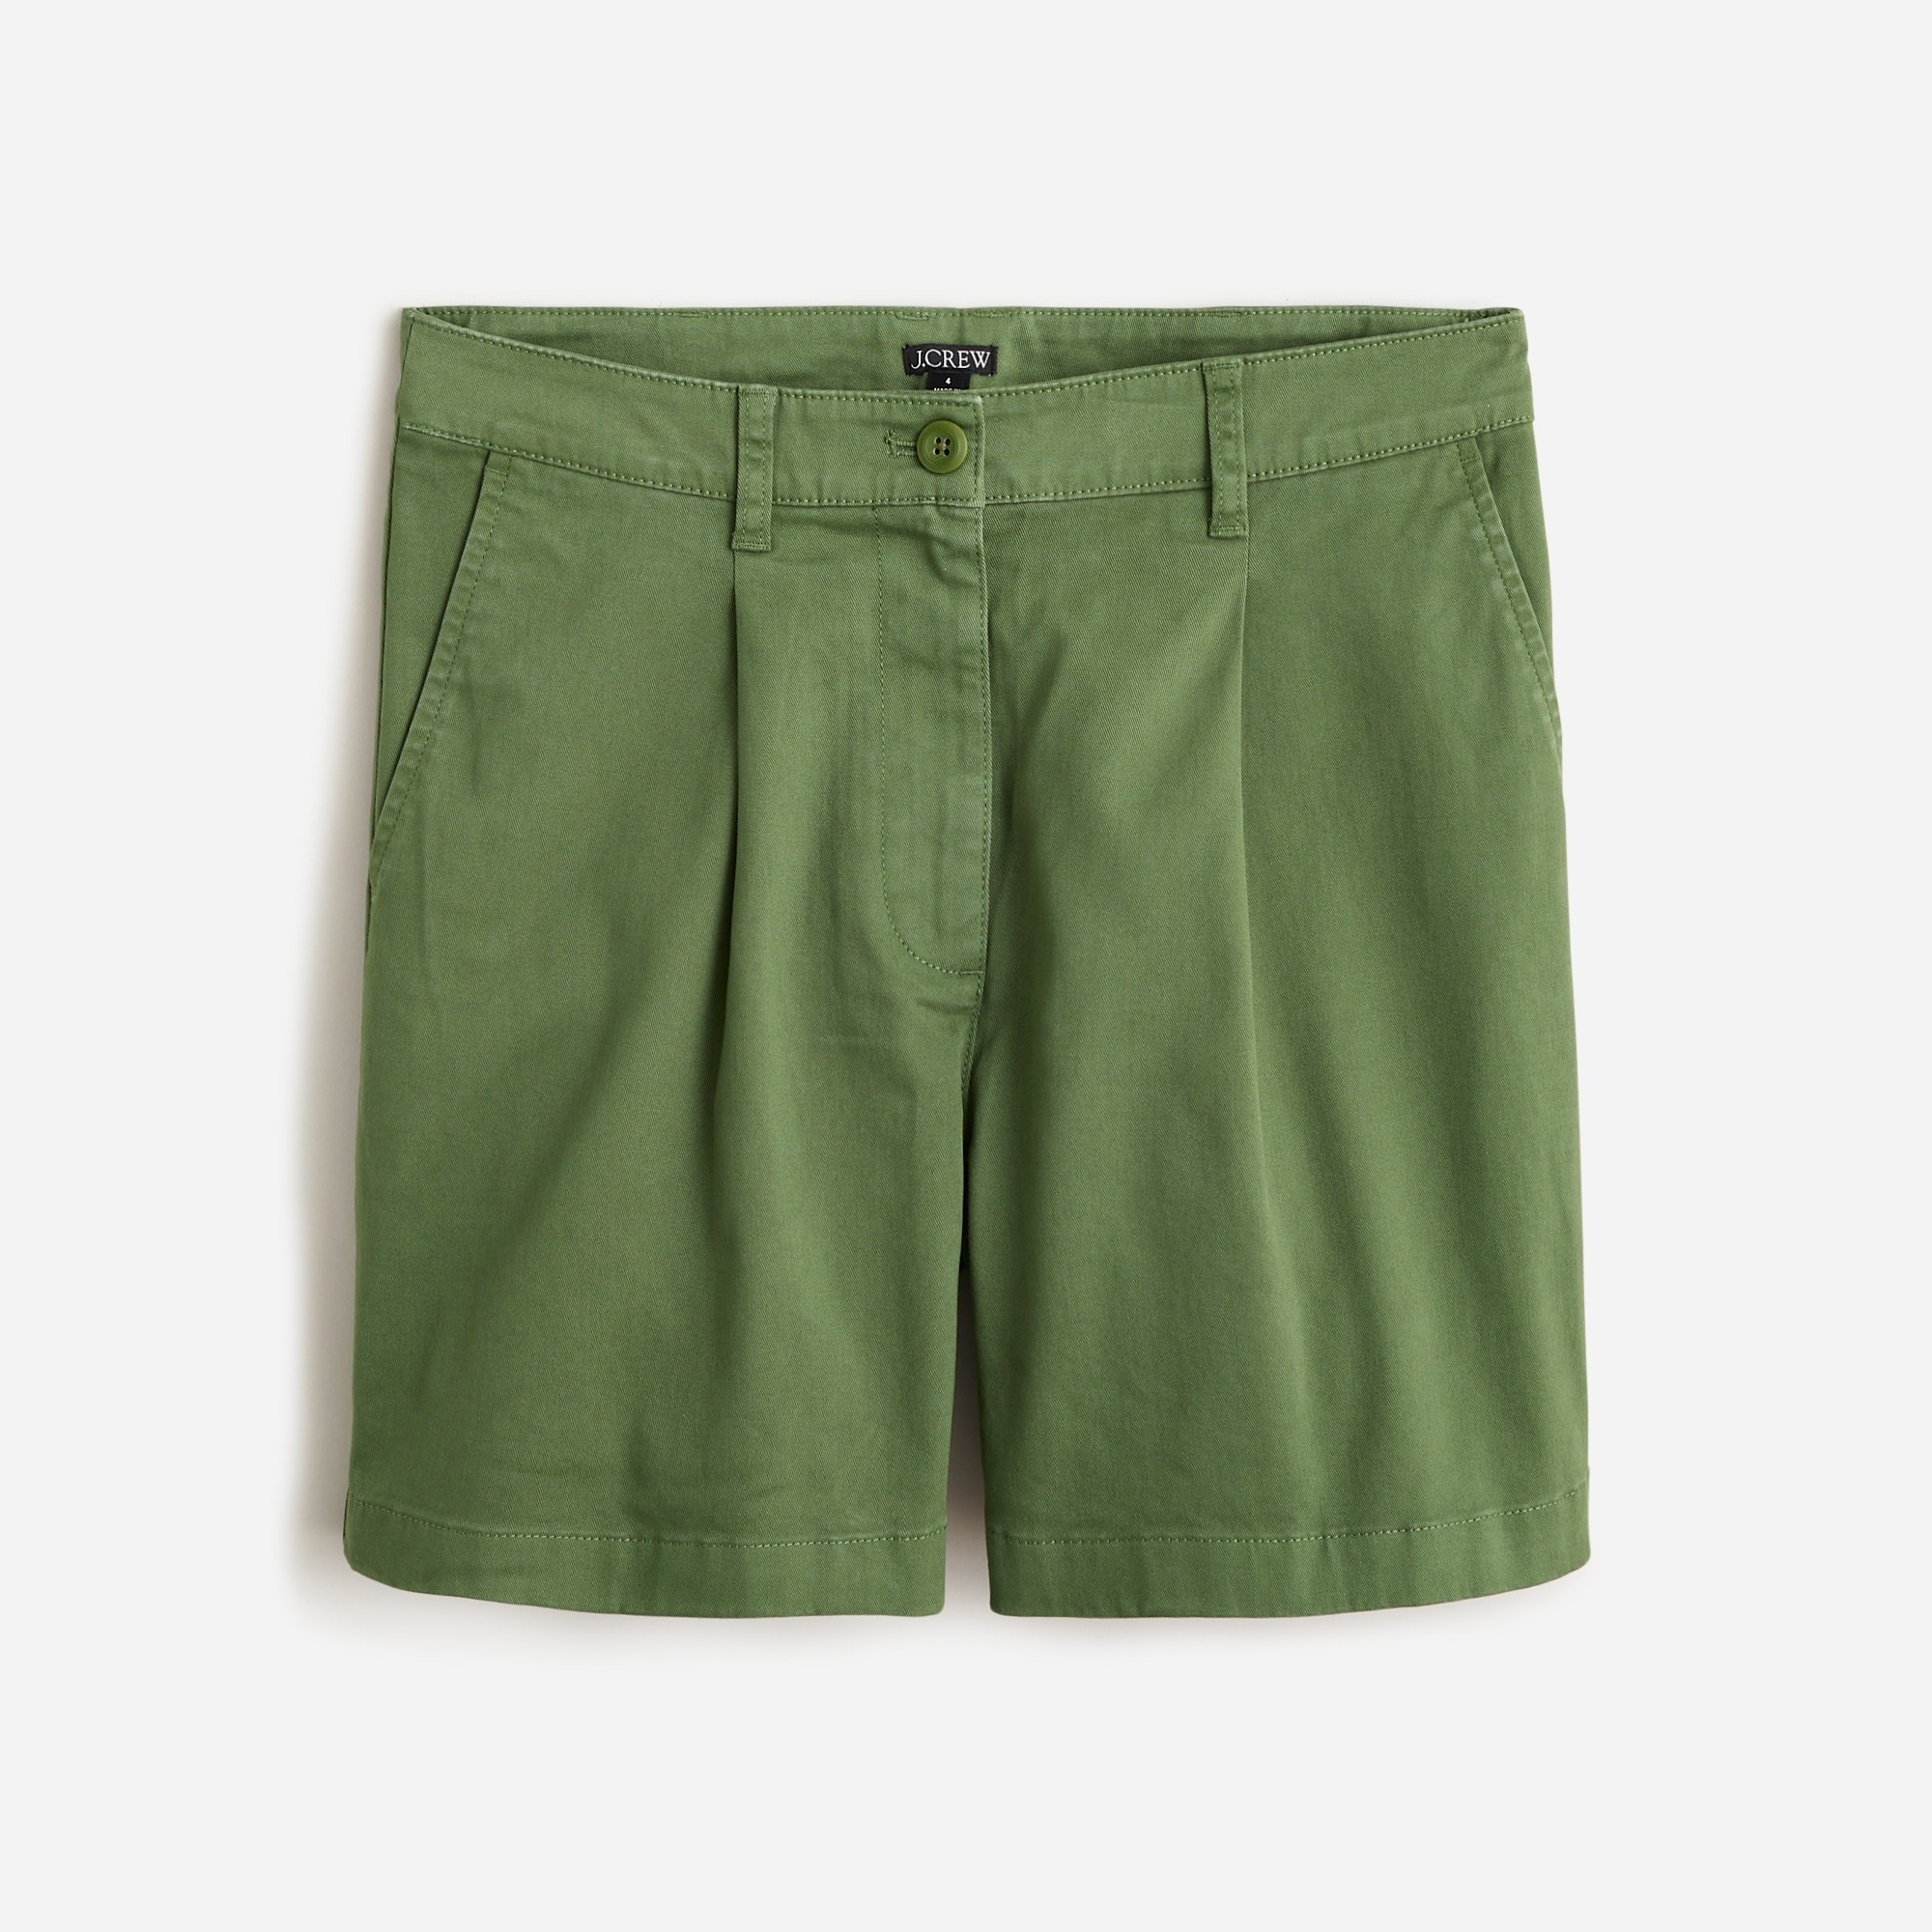  Pleated capeside chino short